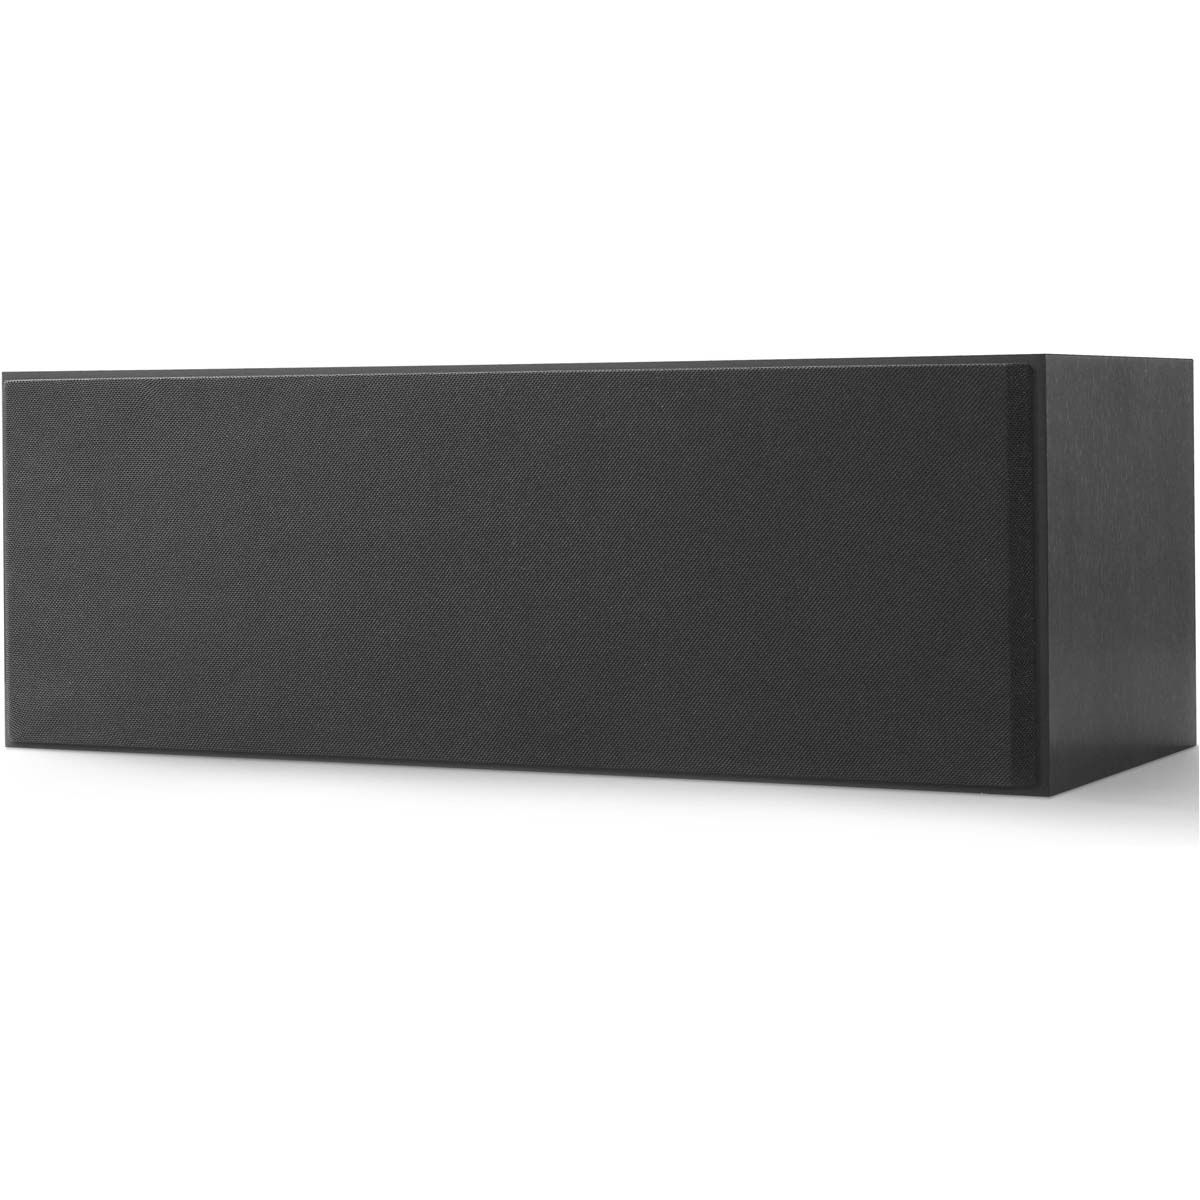 KEF Q250C Center Channel Speaker - Black - front view with grille